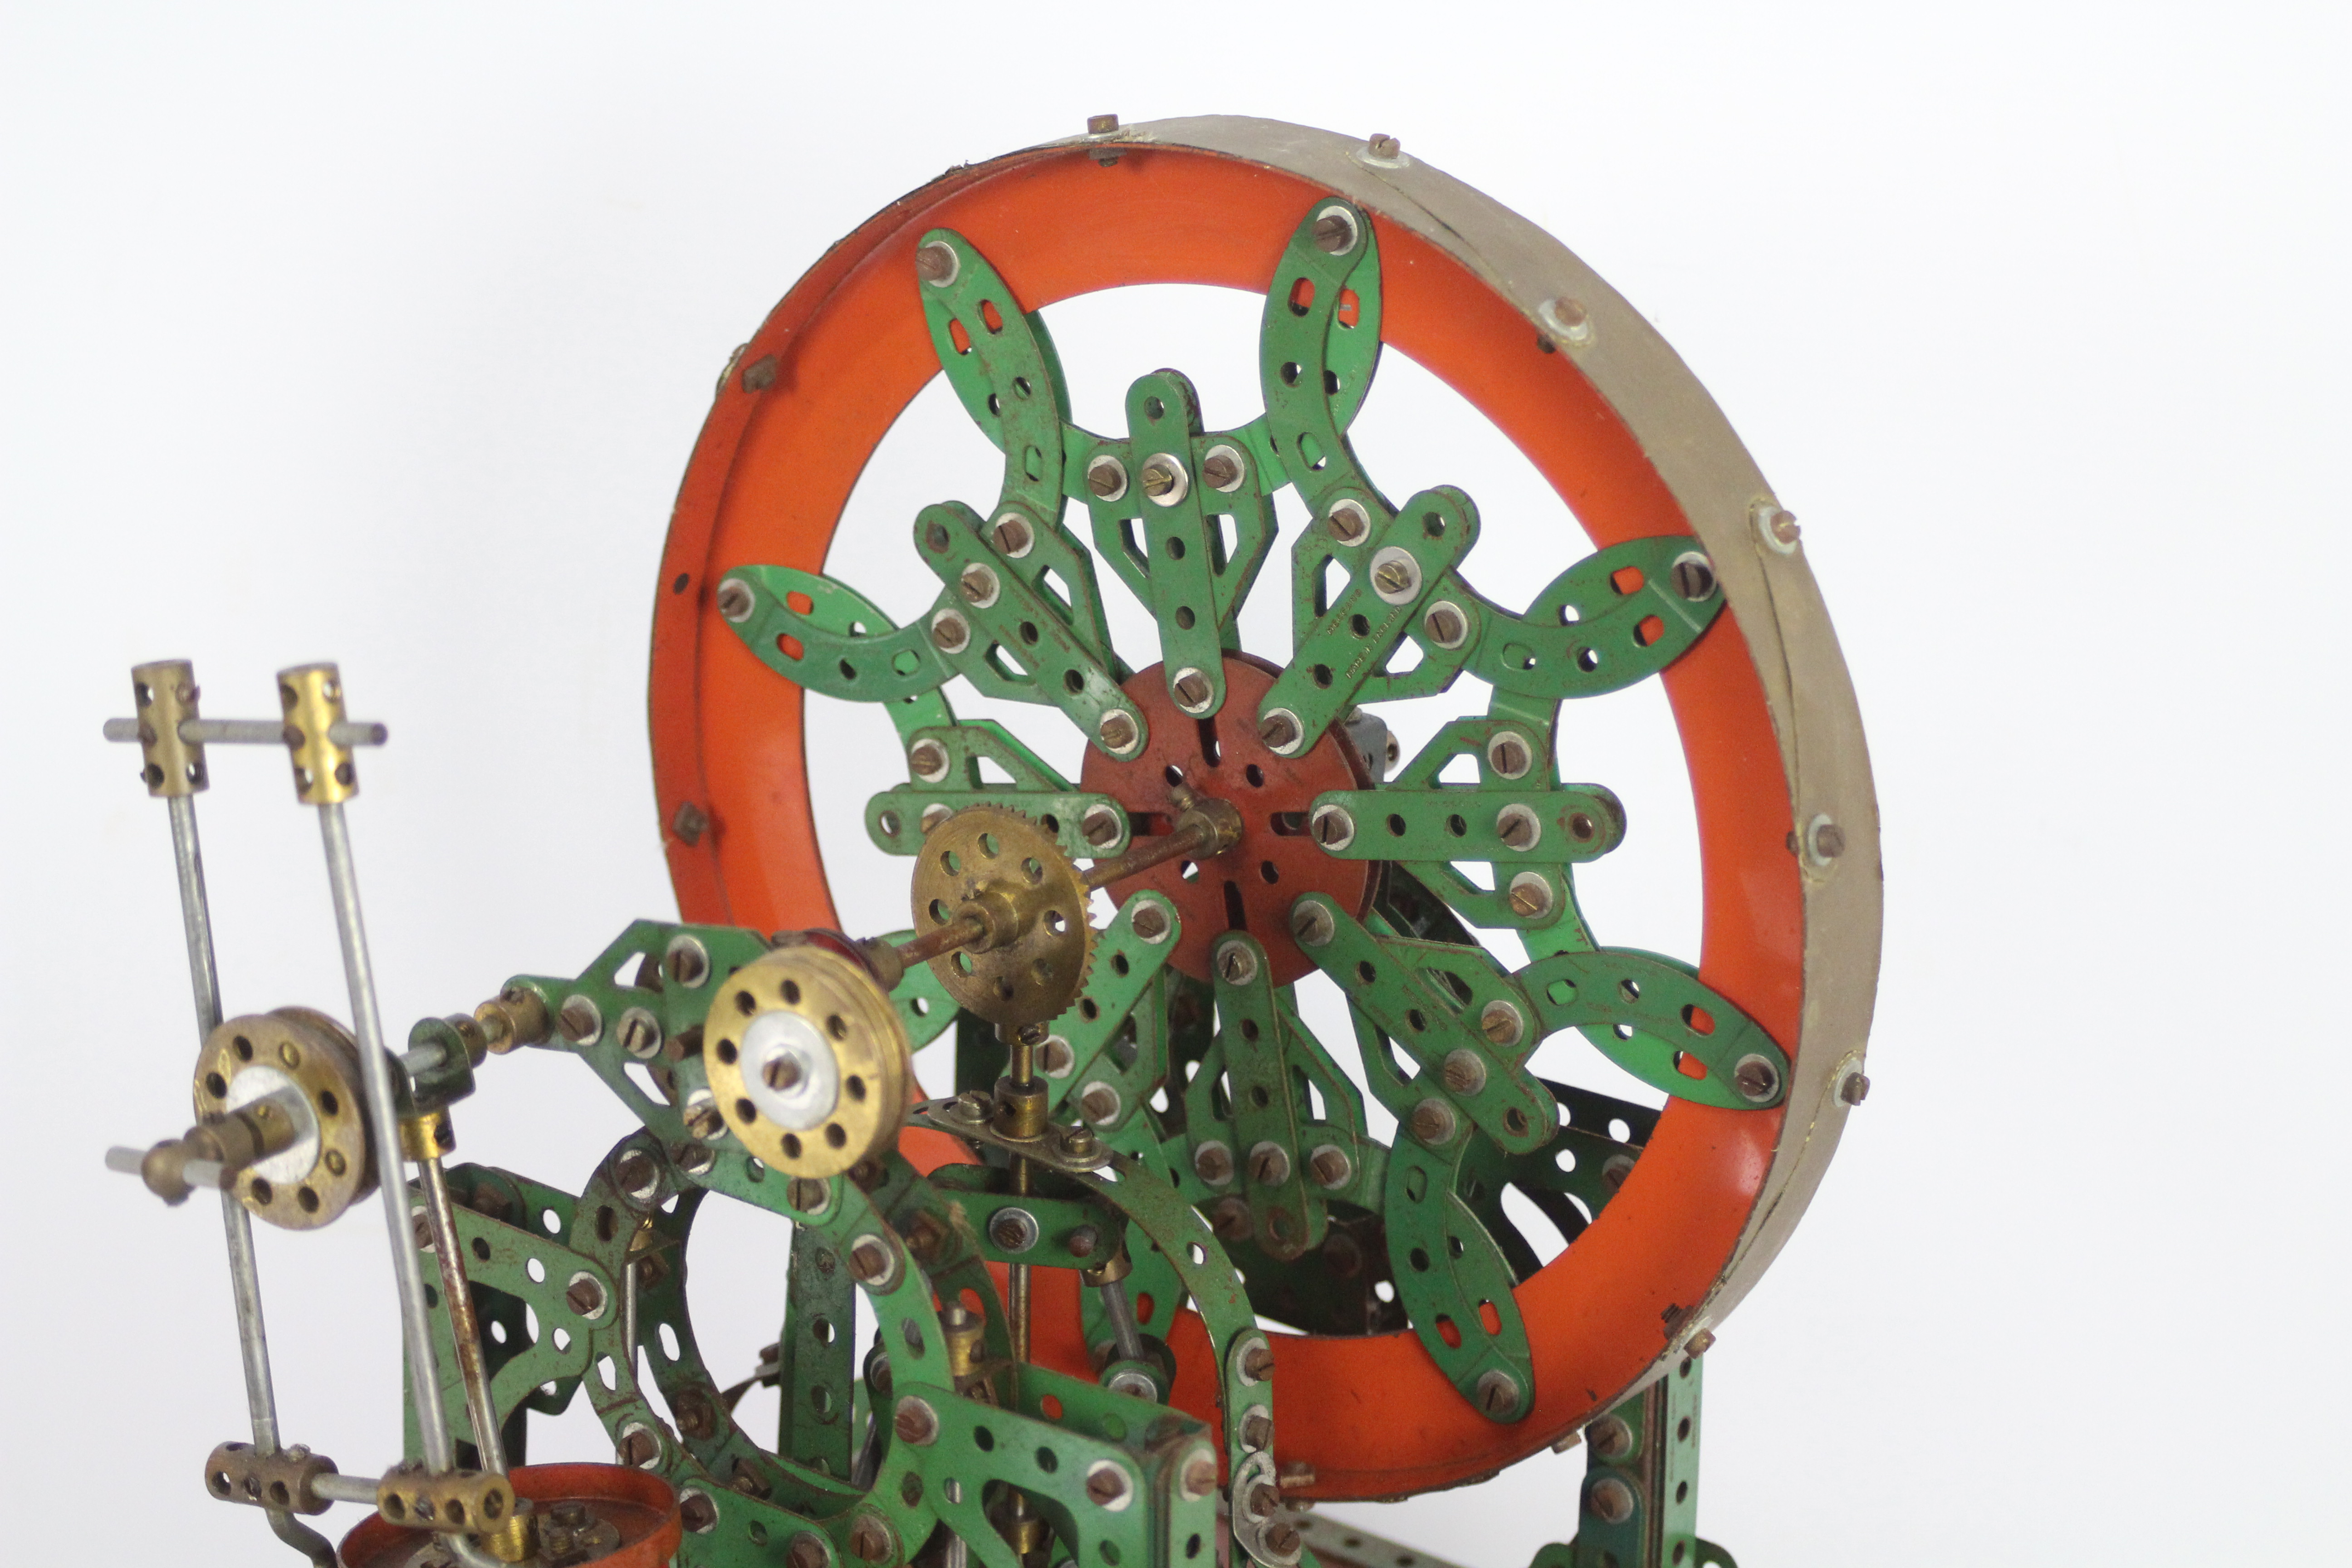 Meccano - A vintage red and green Meccano shop display model of a Decorative Wheel. - Image 2 of 8